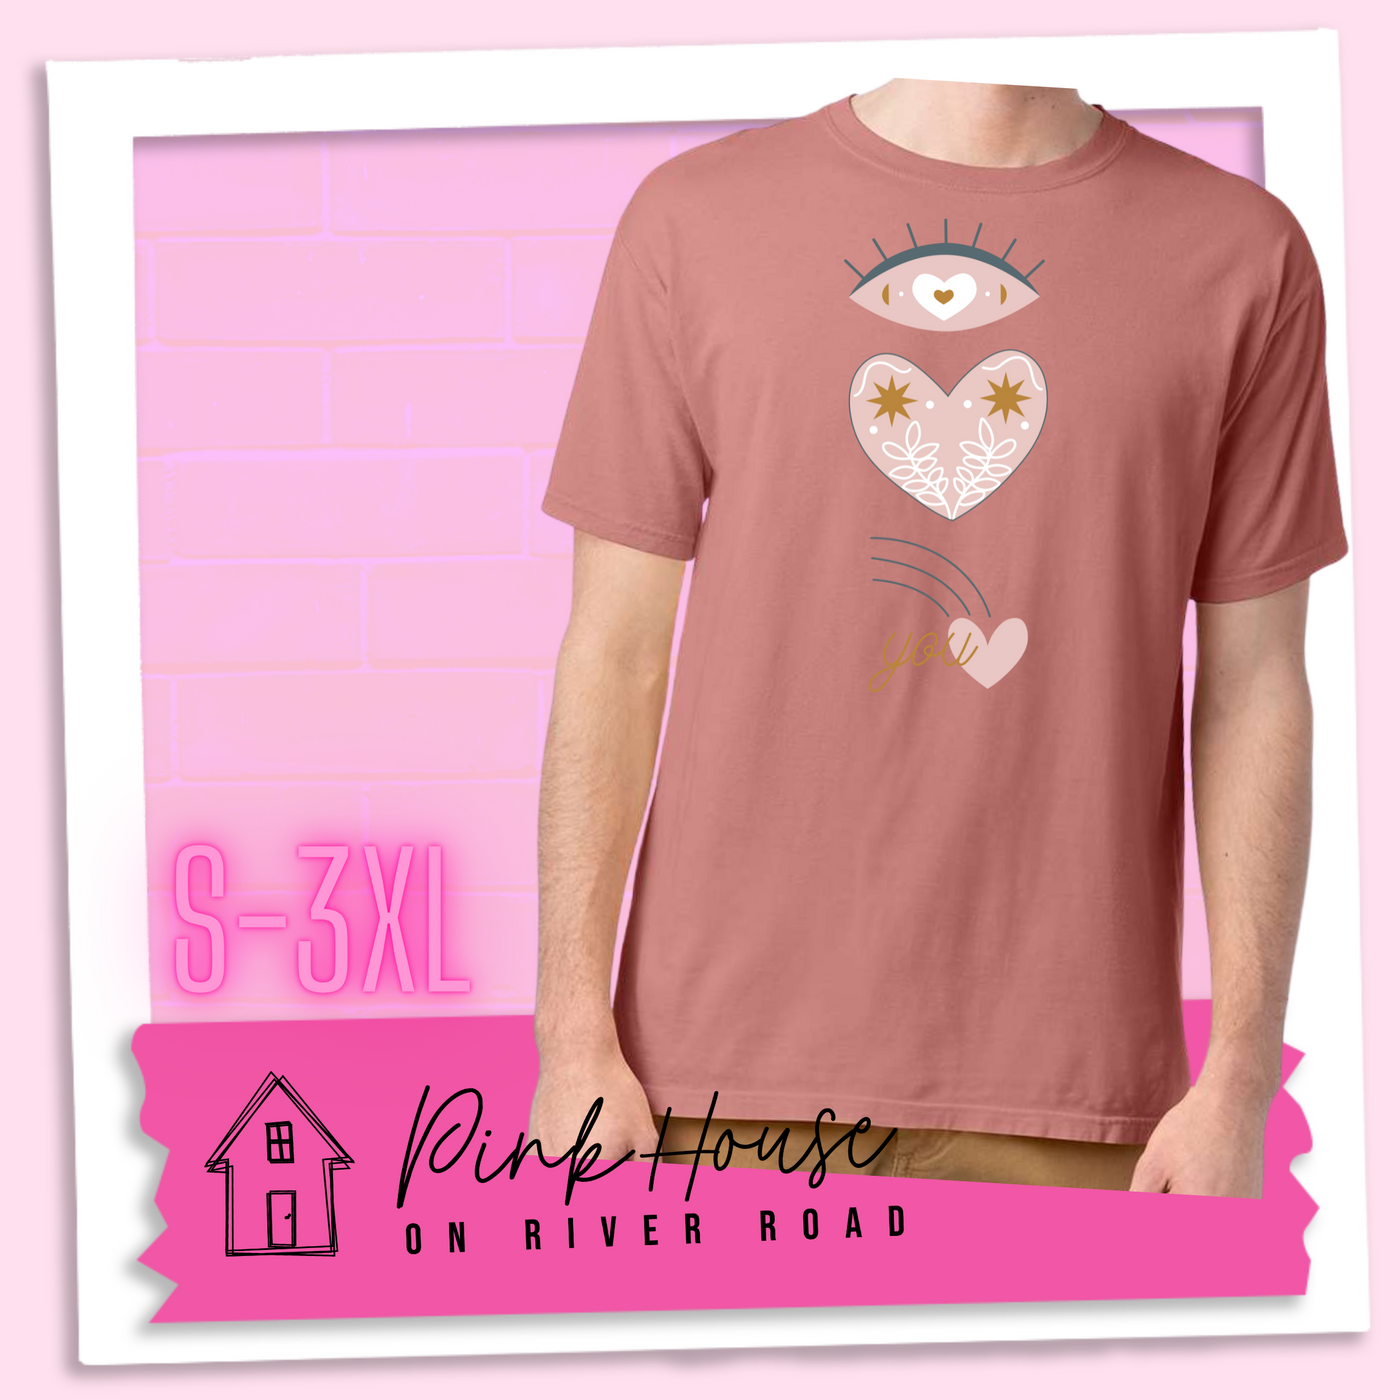 Mauve tee with a graphic of an eye with a heart for the pupil and underneath that a heart with a floral and star design and a shooting heart with the word you. The graphic represents eye heart you